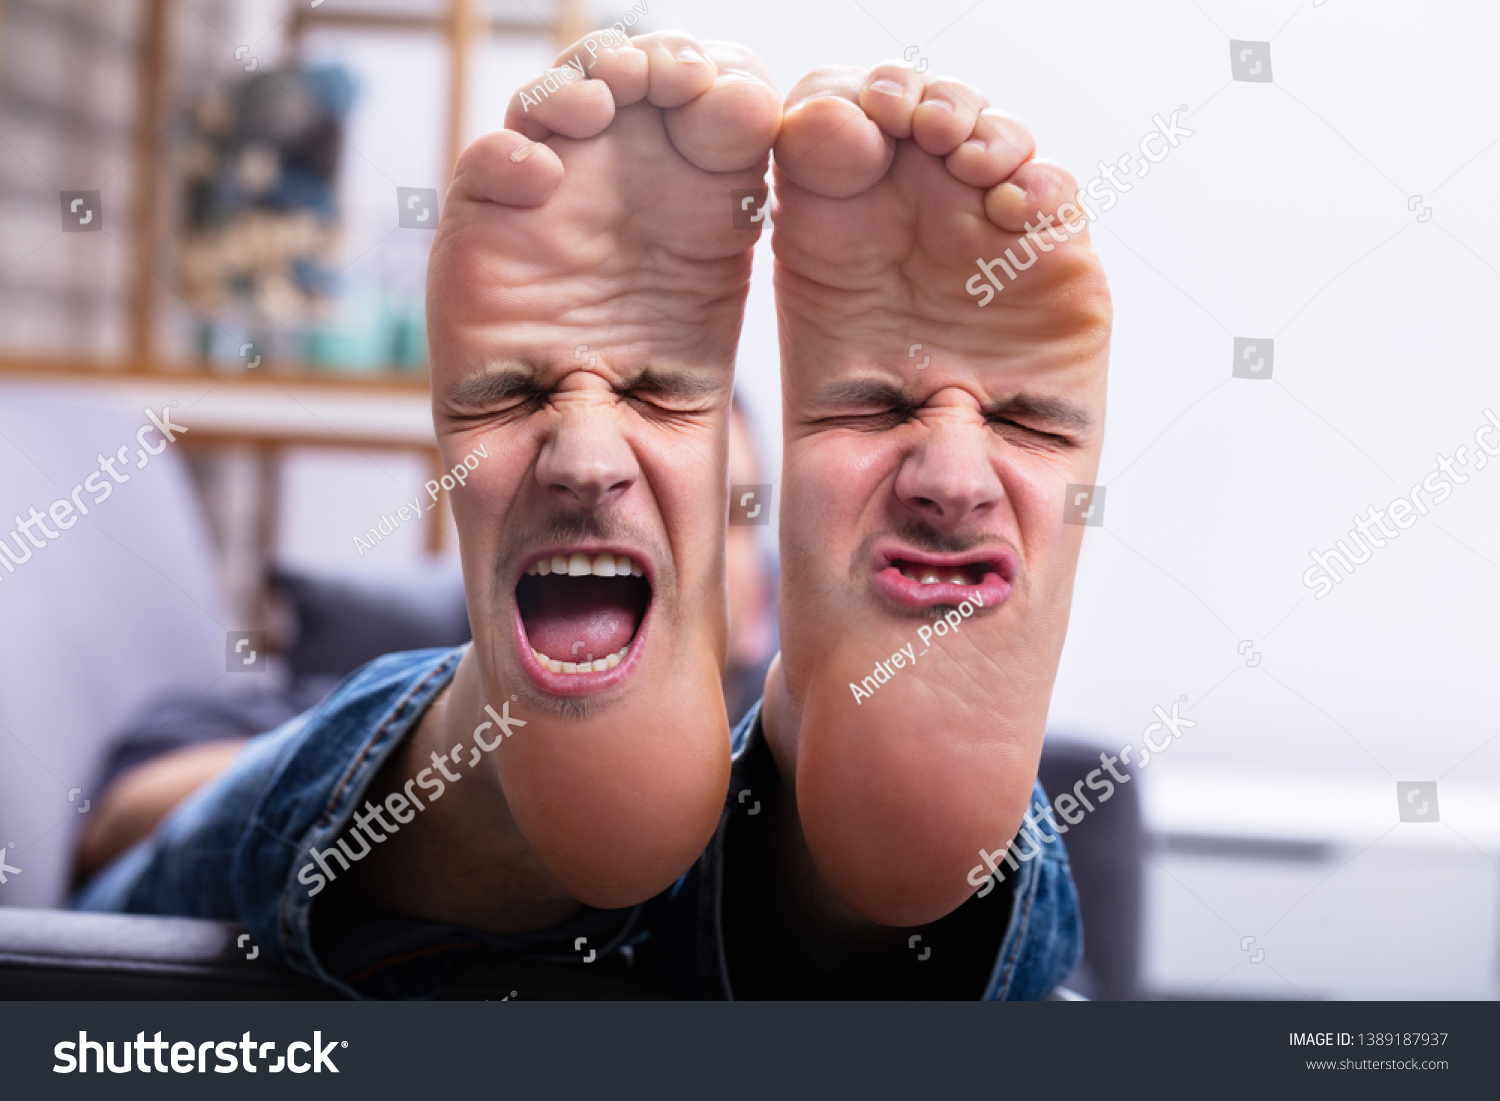 Close-up Of Man's Feet With Painful Facial Expression #1389187937